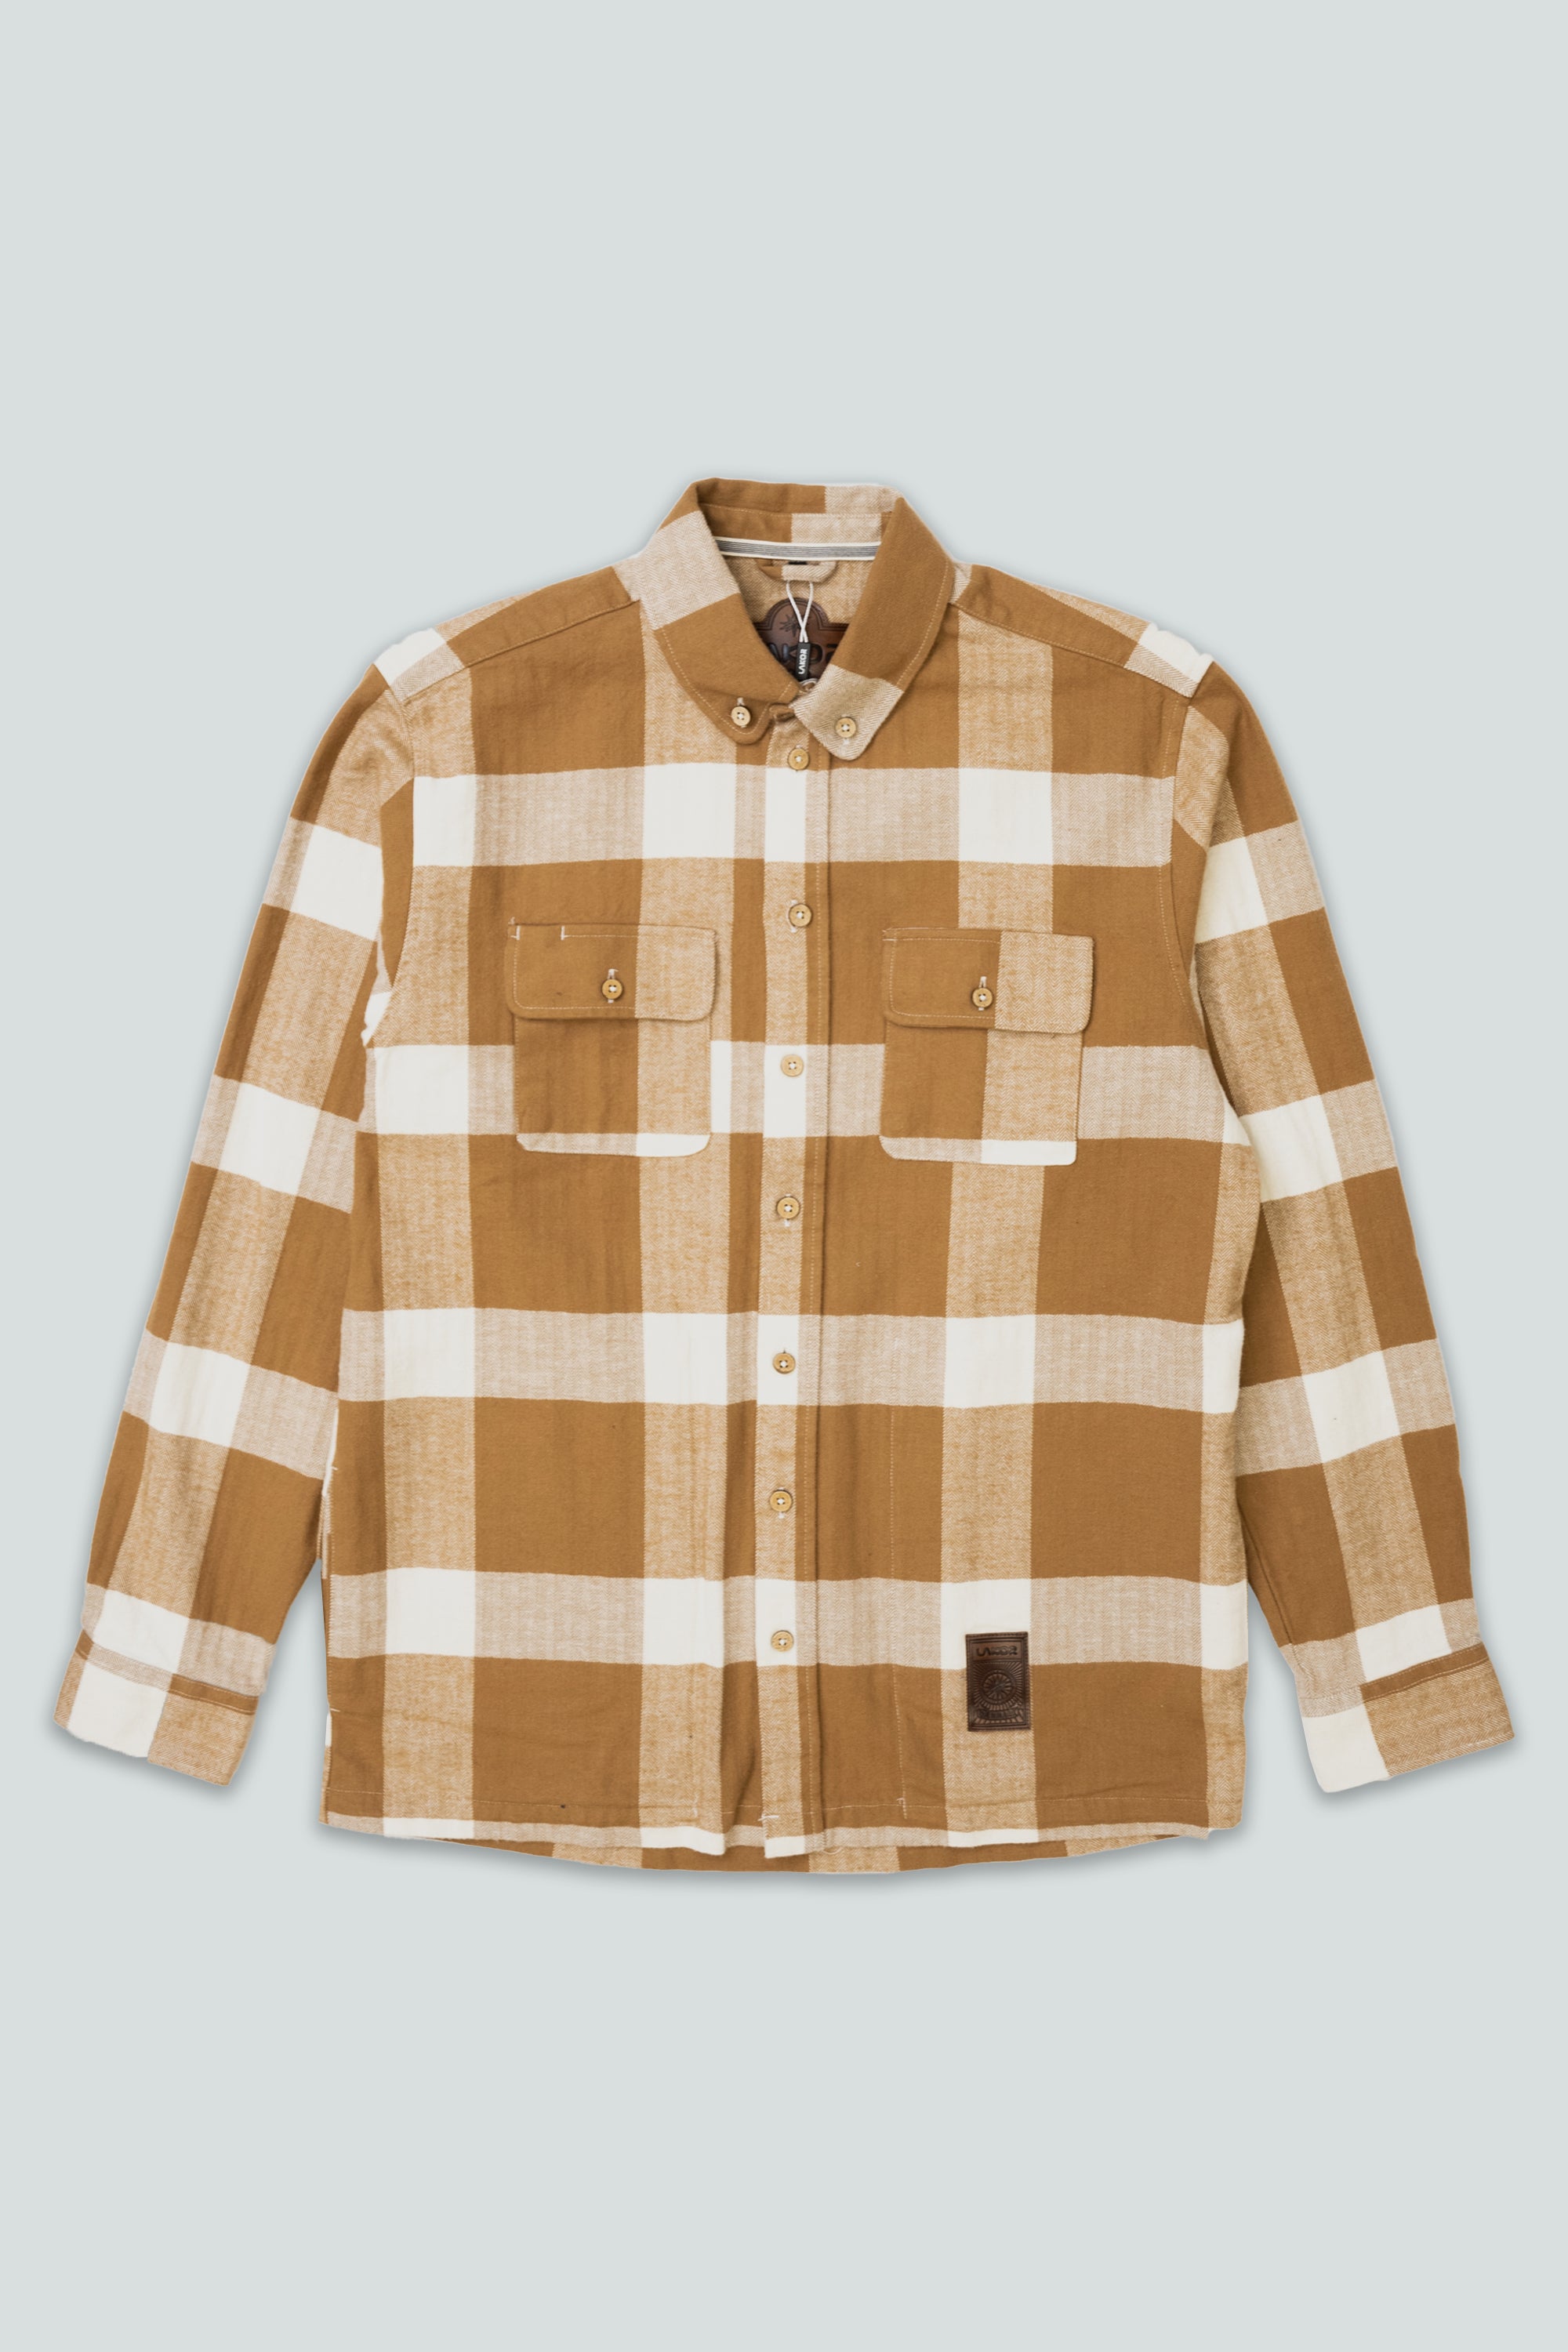 Recycled Work Shirt (Brown)